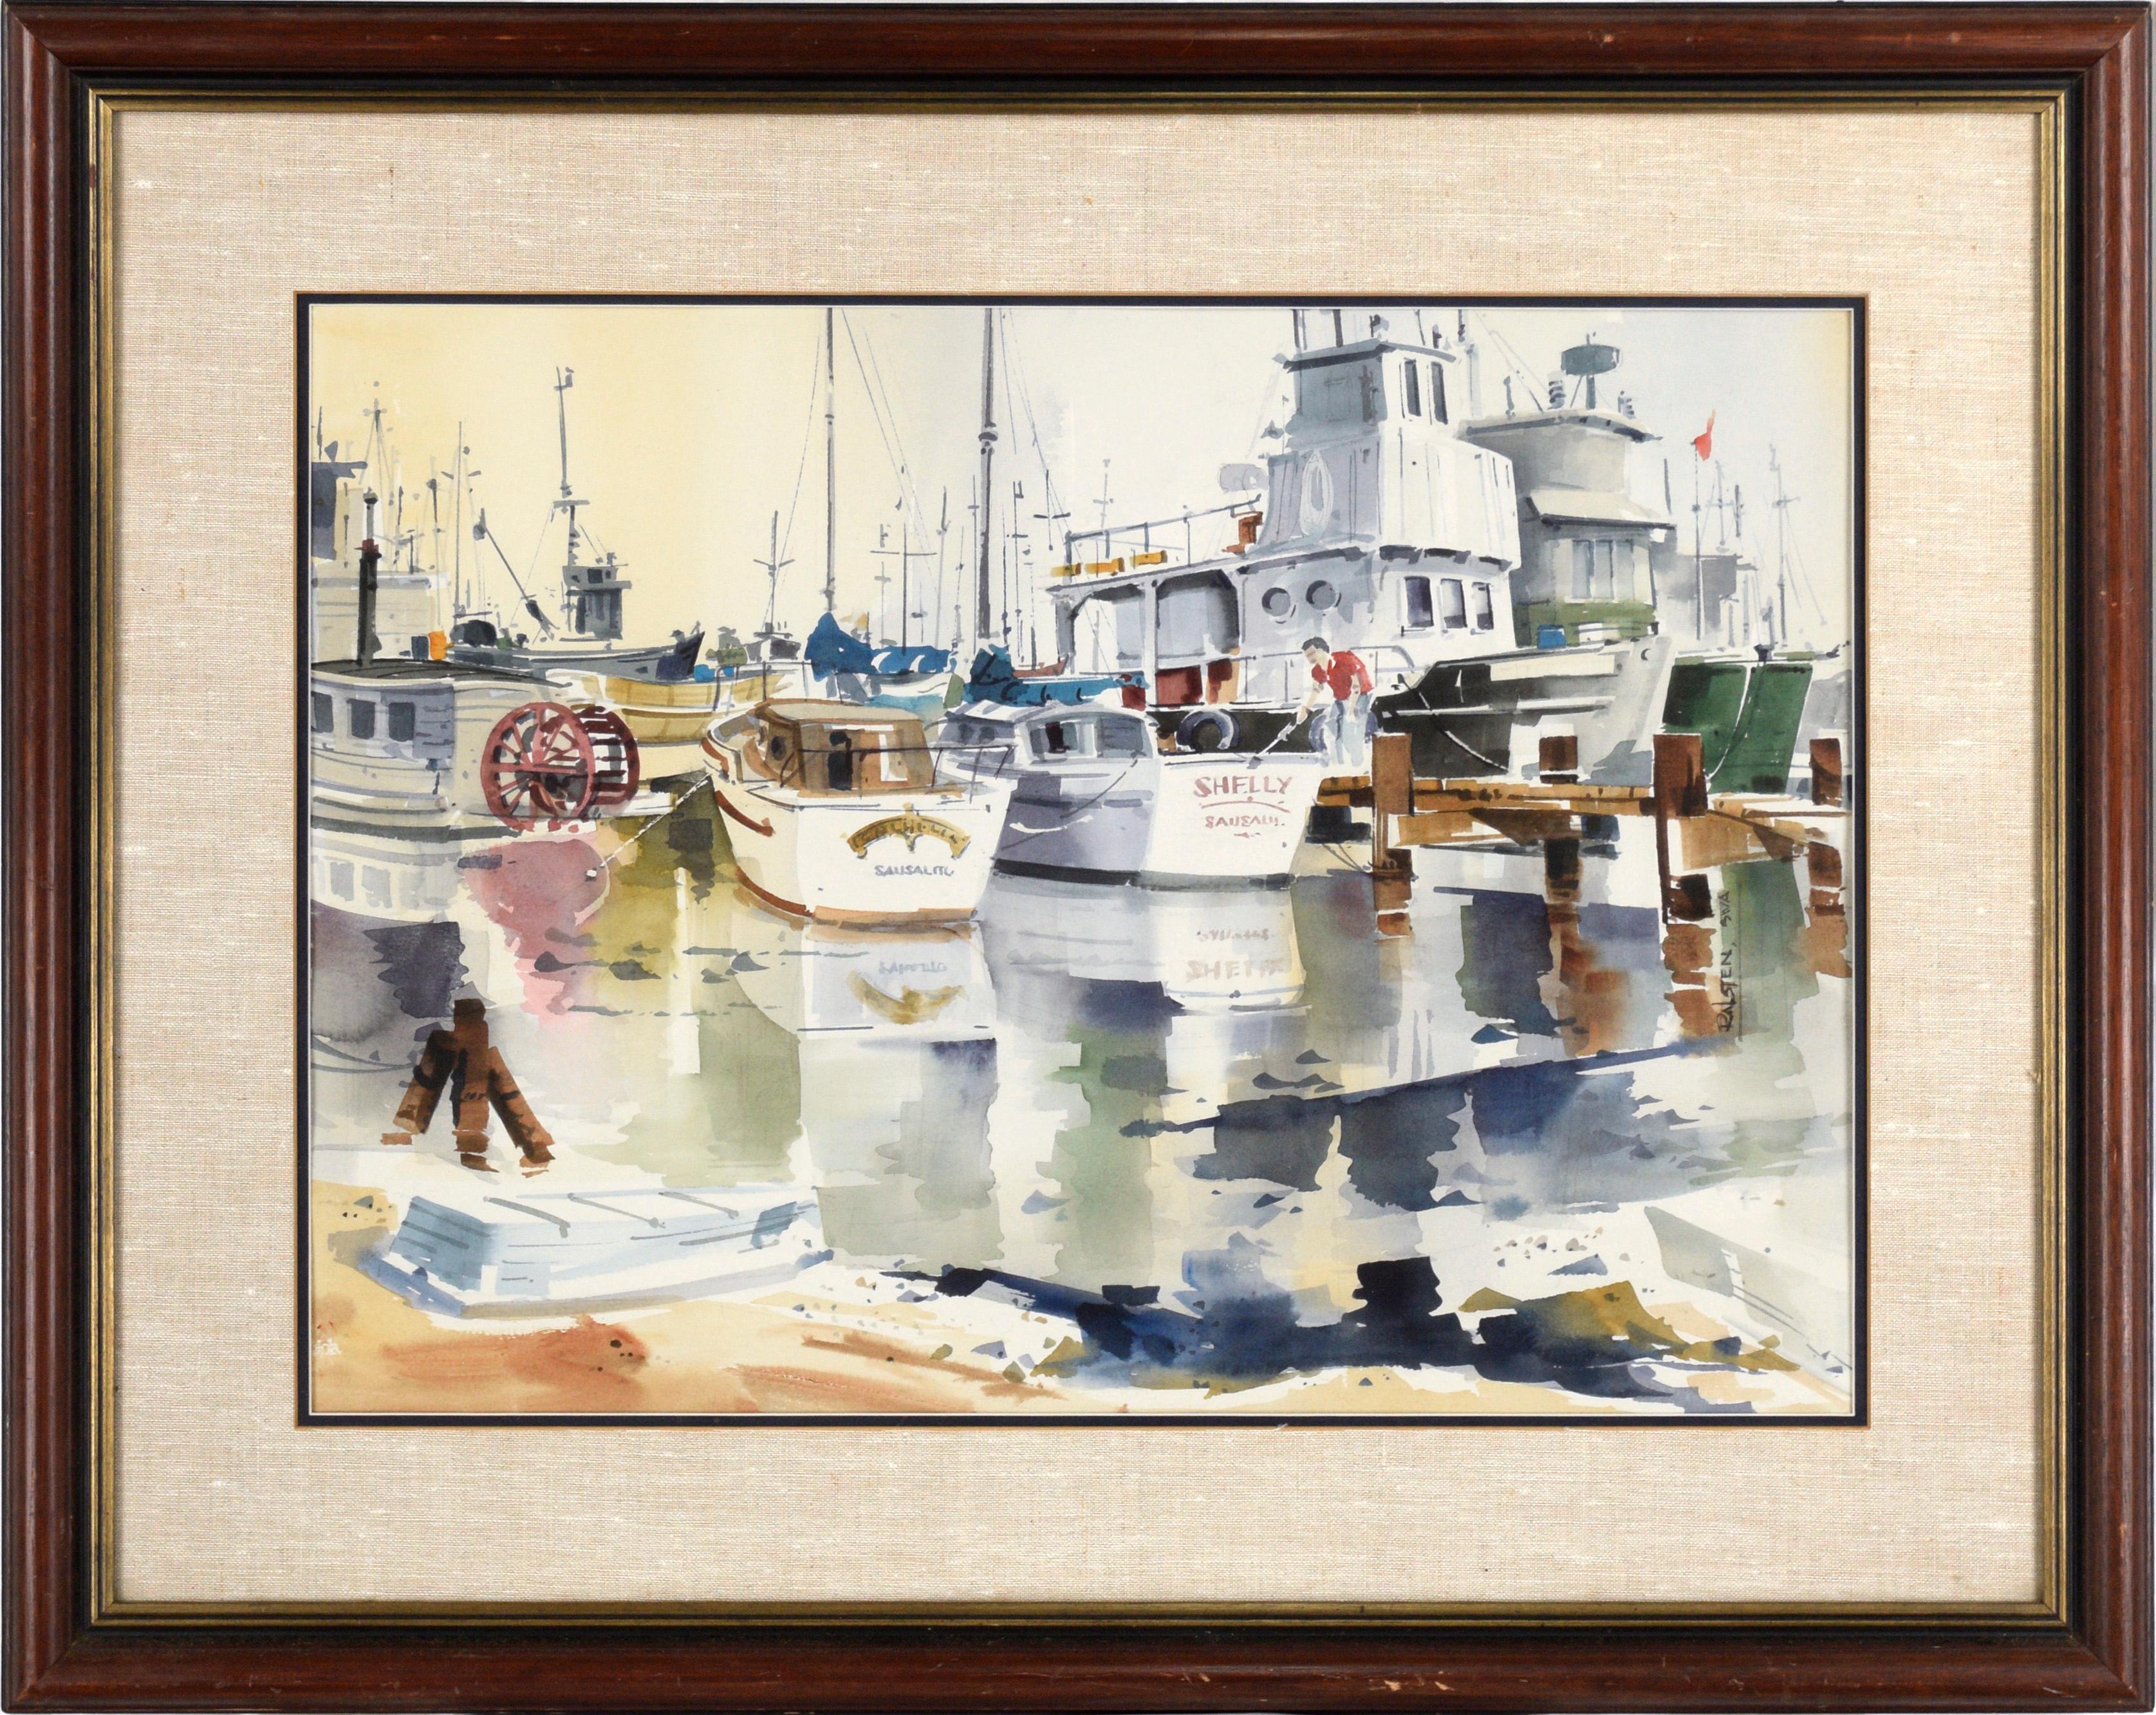 Ralsten Landscape Painting - Boats at Sausalito Harbor - Watercolor on Paper